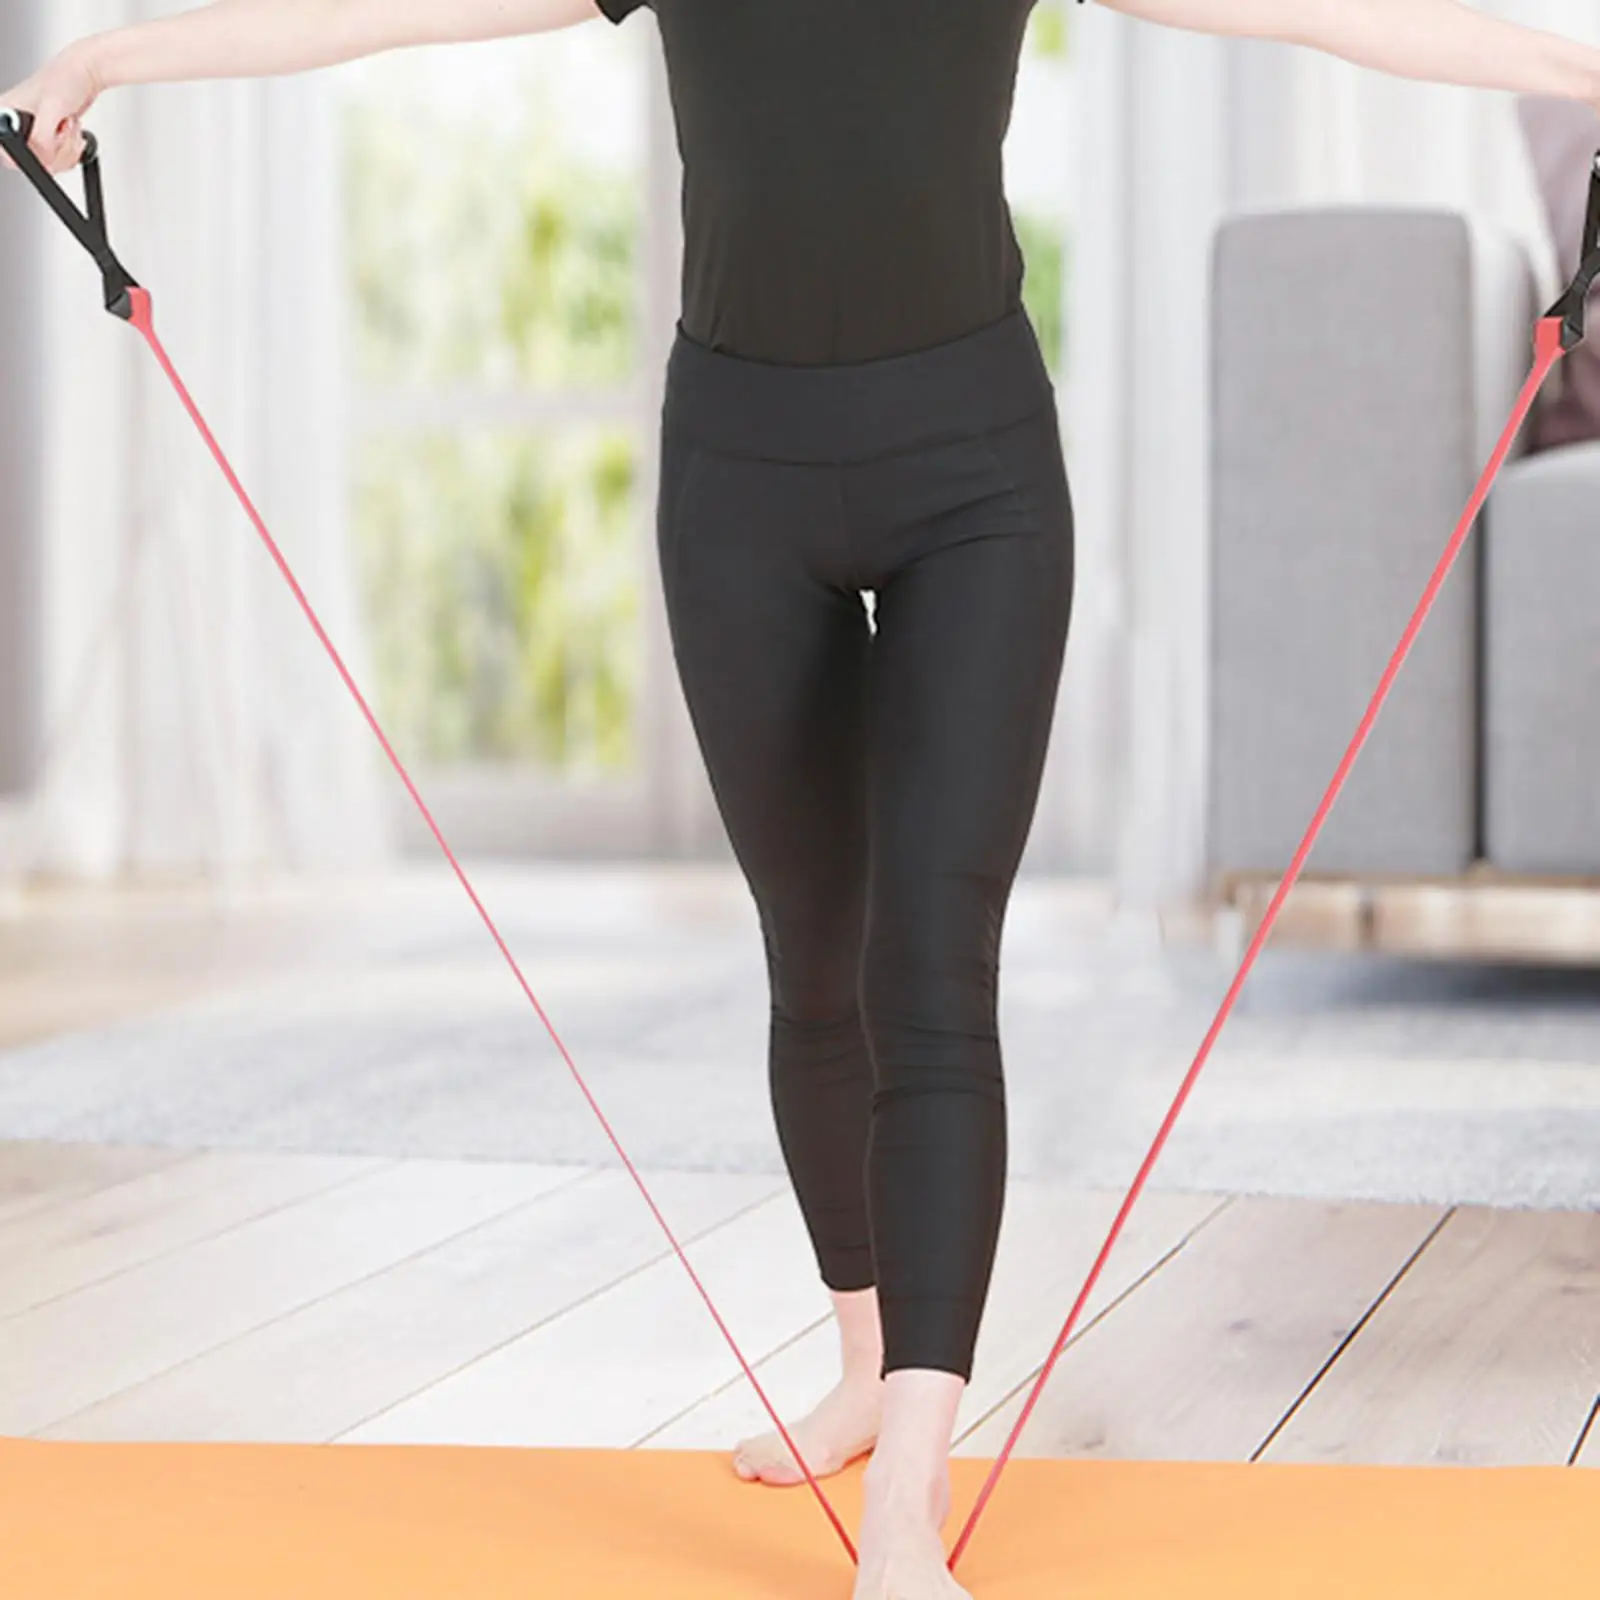 Exercise Resistance Bands with Handles Expander Home Yoga Workout Pull Rope